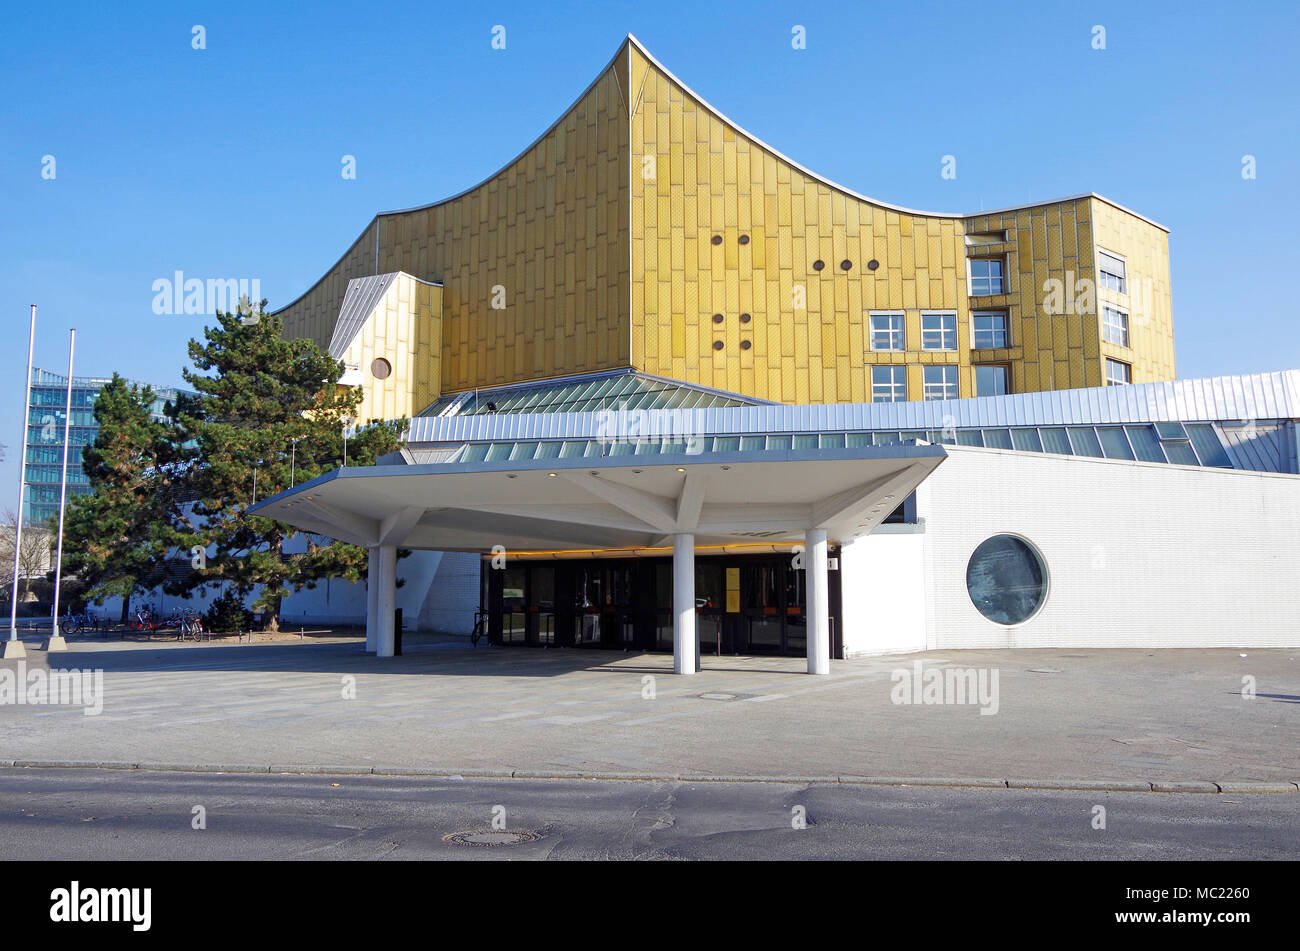 The Berliner Philharmonie concert hall, home to the Berlin Philharmonic Orchestra, architect Hans Scharoun, Stock Photo